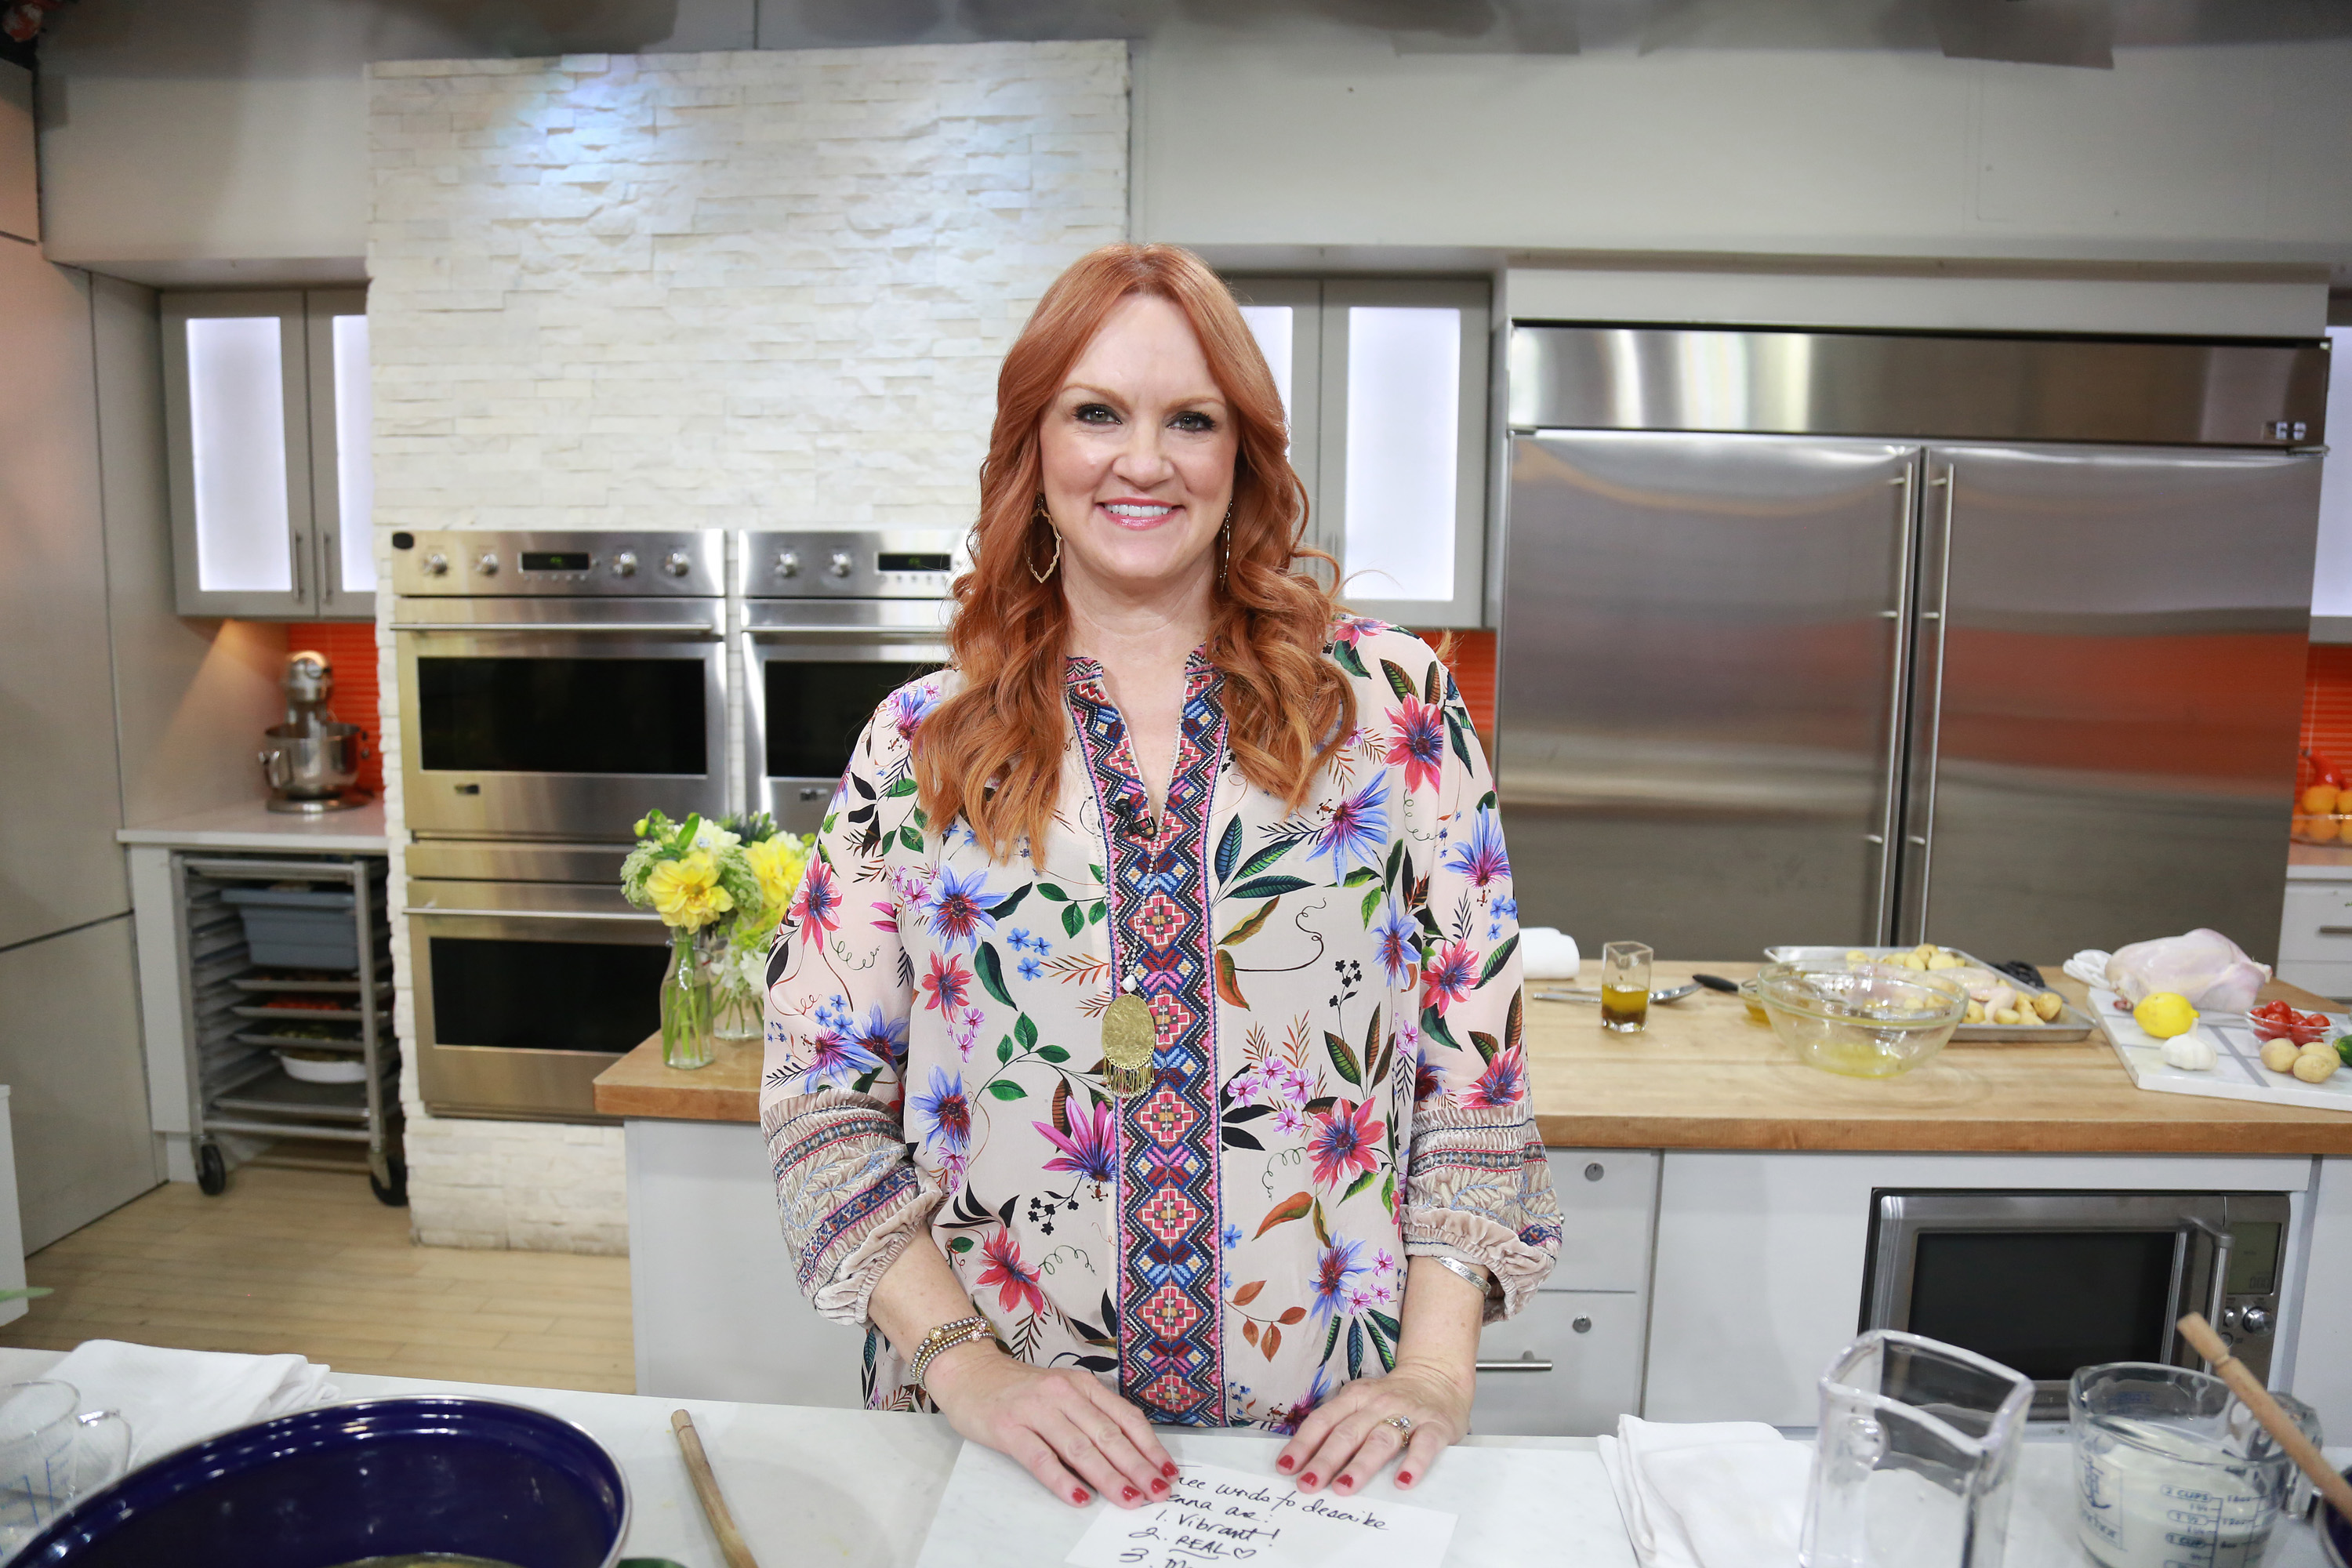 'The Pioneer Woman' star Ree Drummond smiling in her kitchen while wearing a floral top.